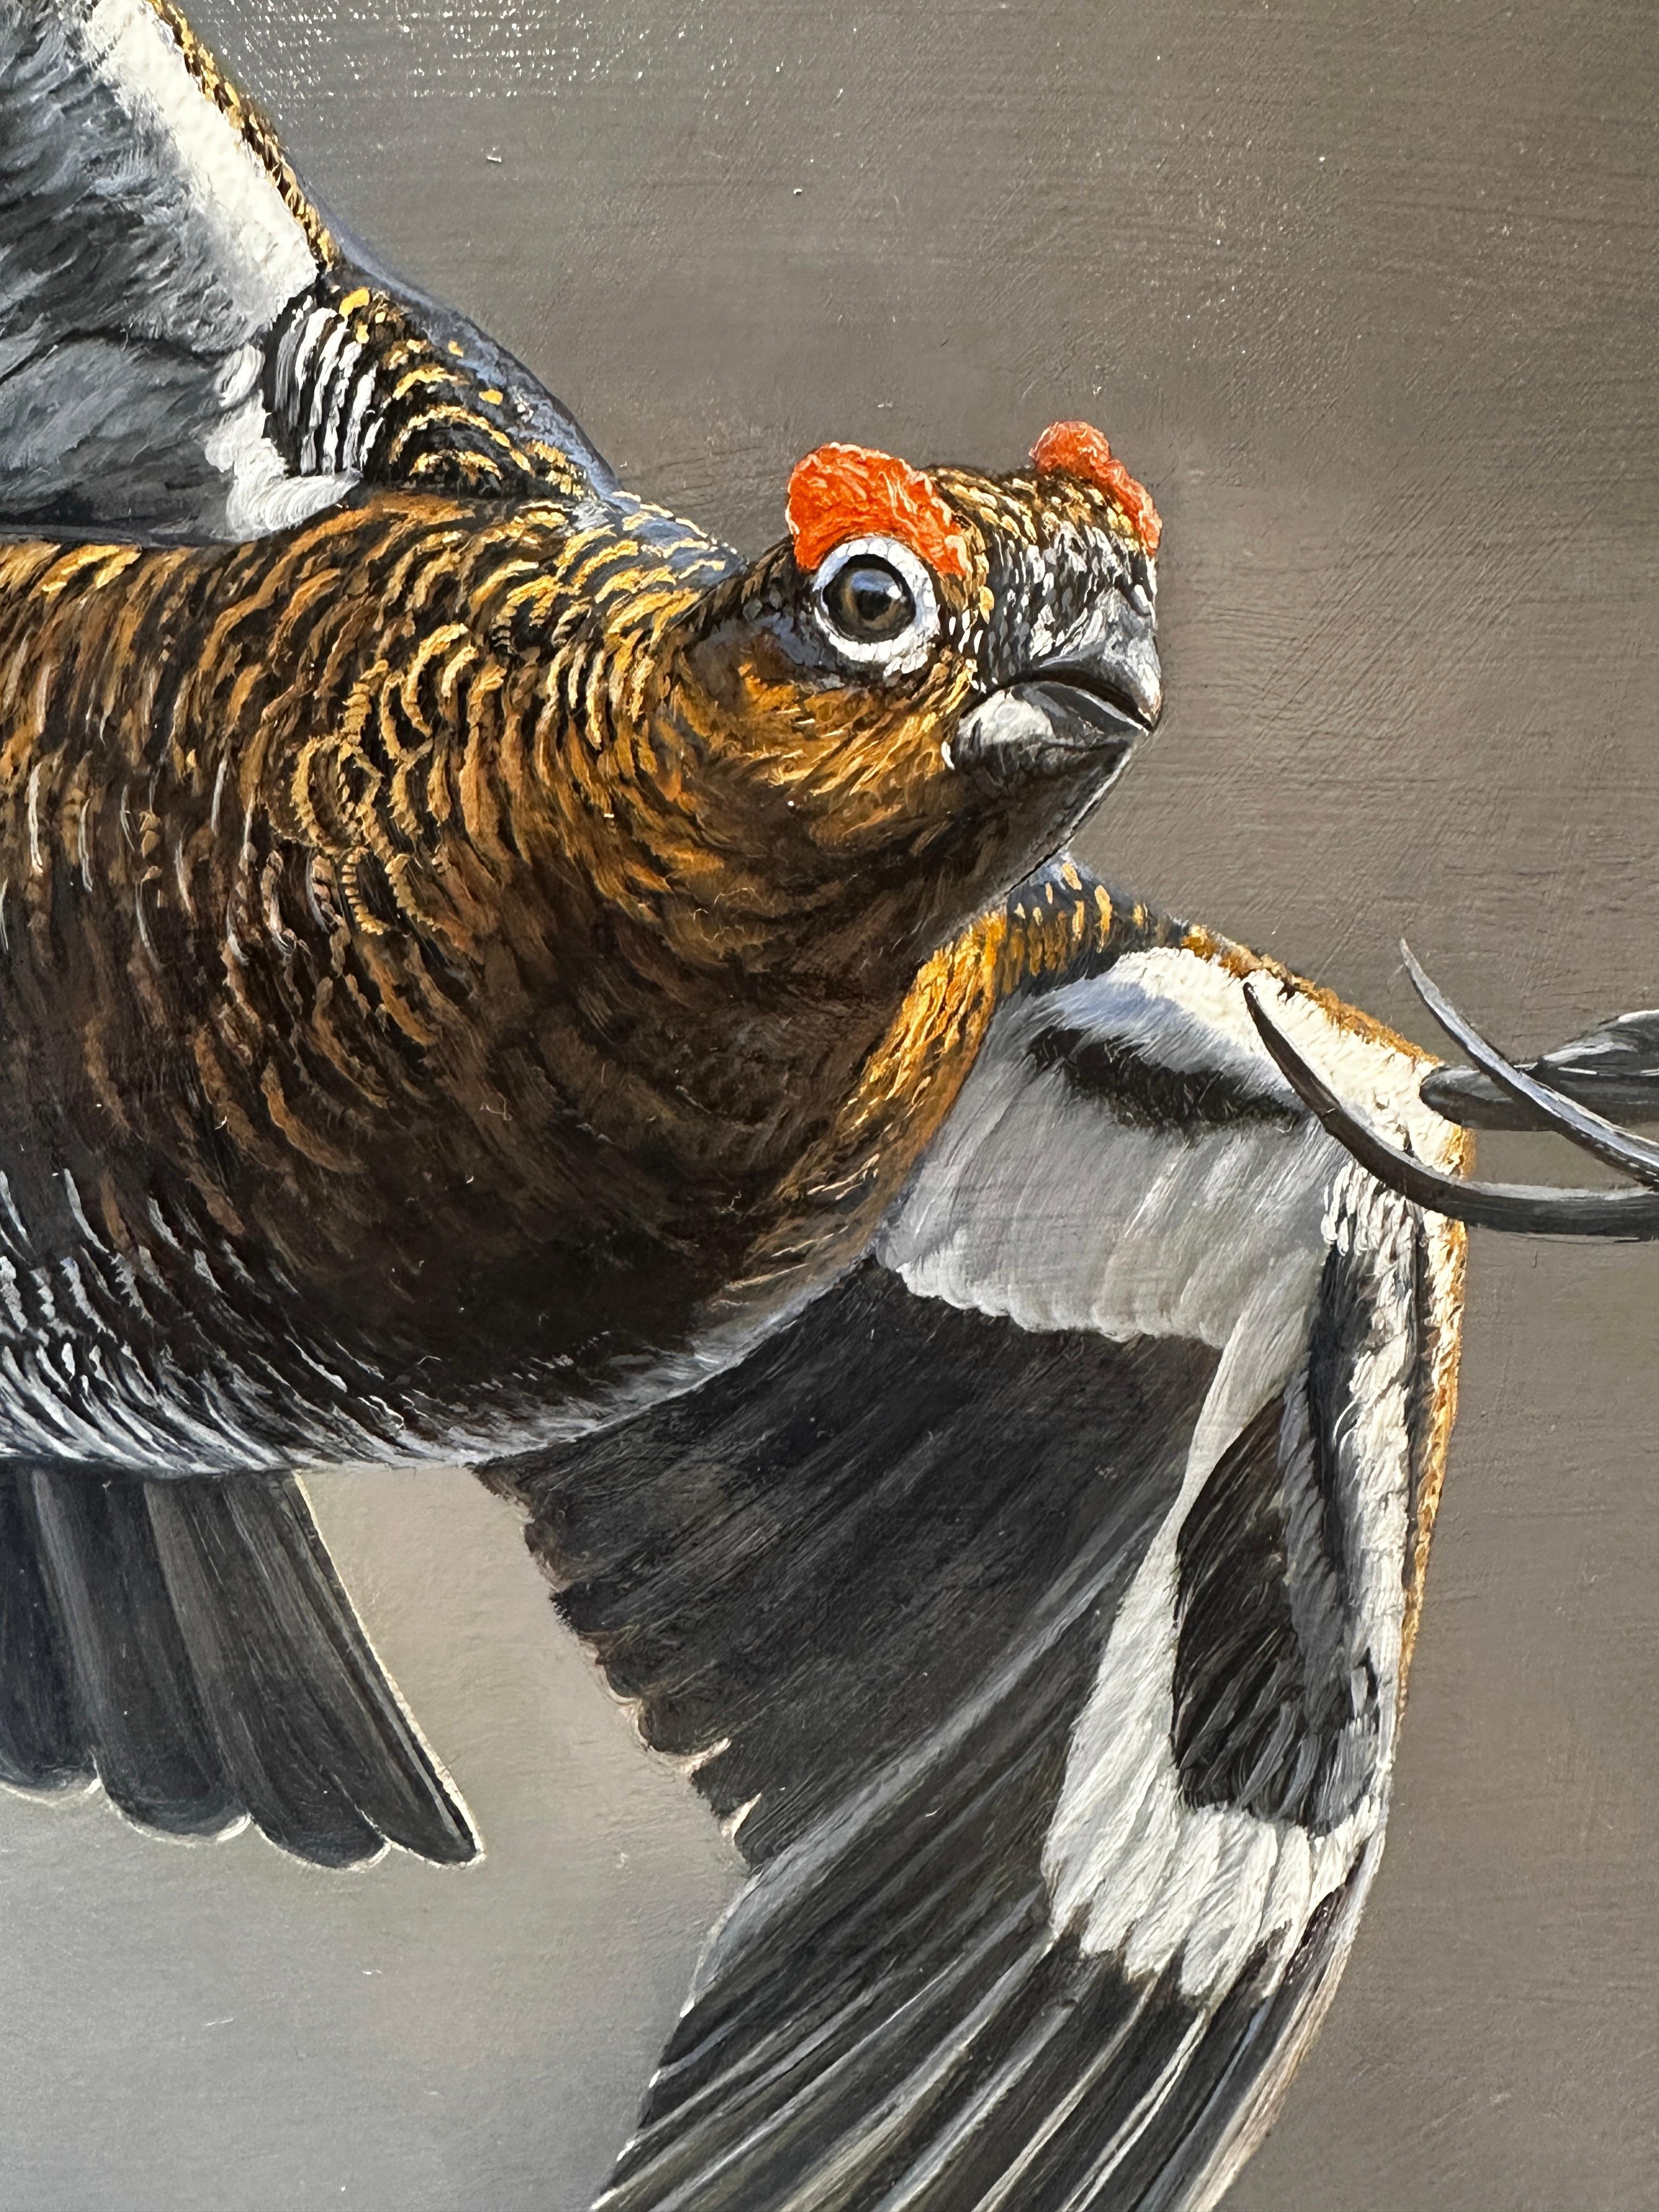 'Follow the Leader' photorealist painting of two grouse birds flying, grey/black - Photorealist Painting by Ben Waddams